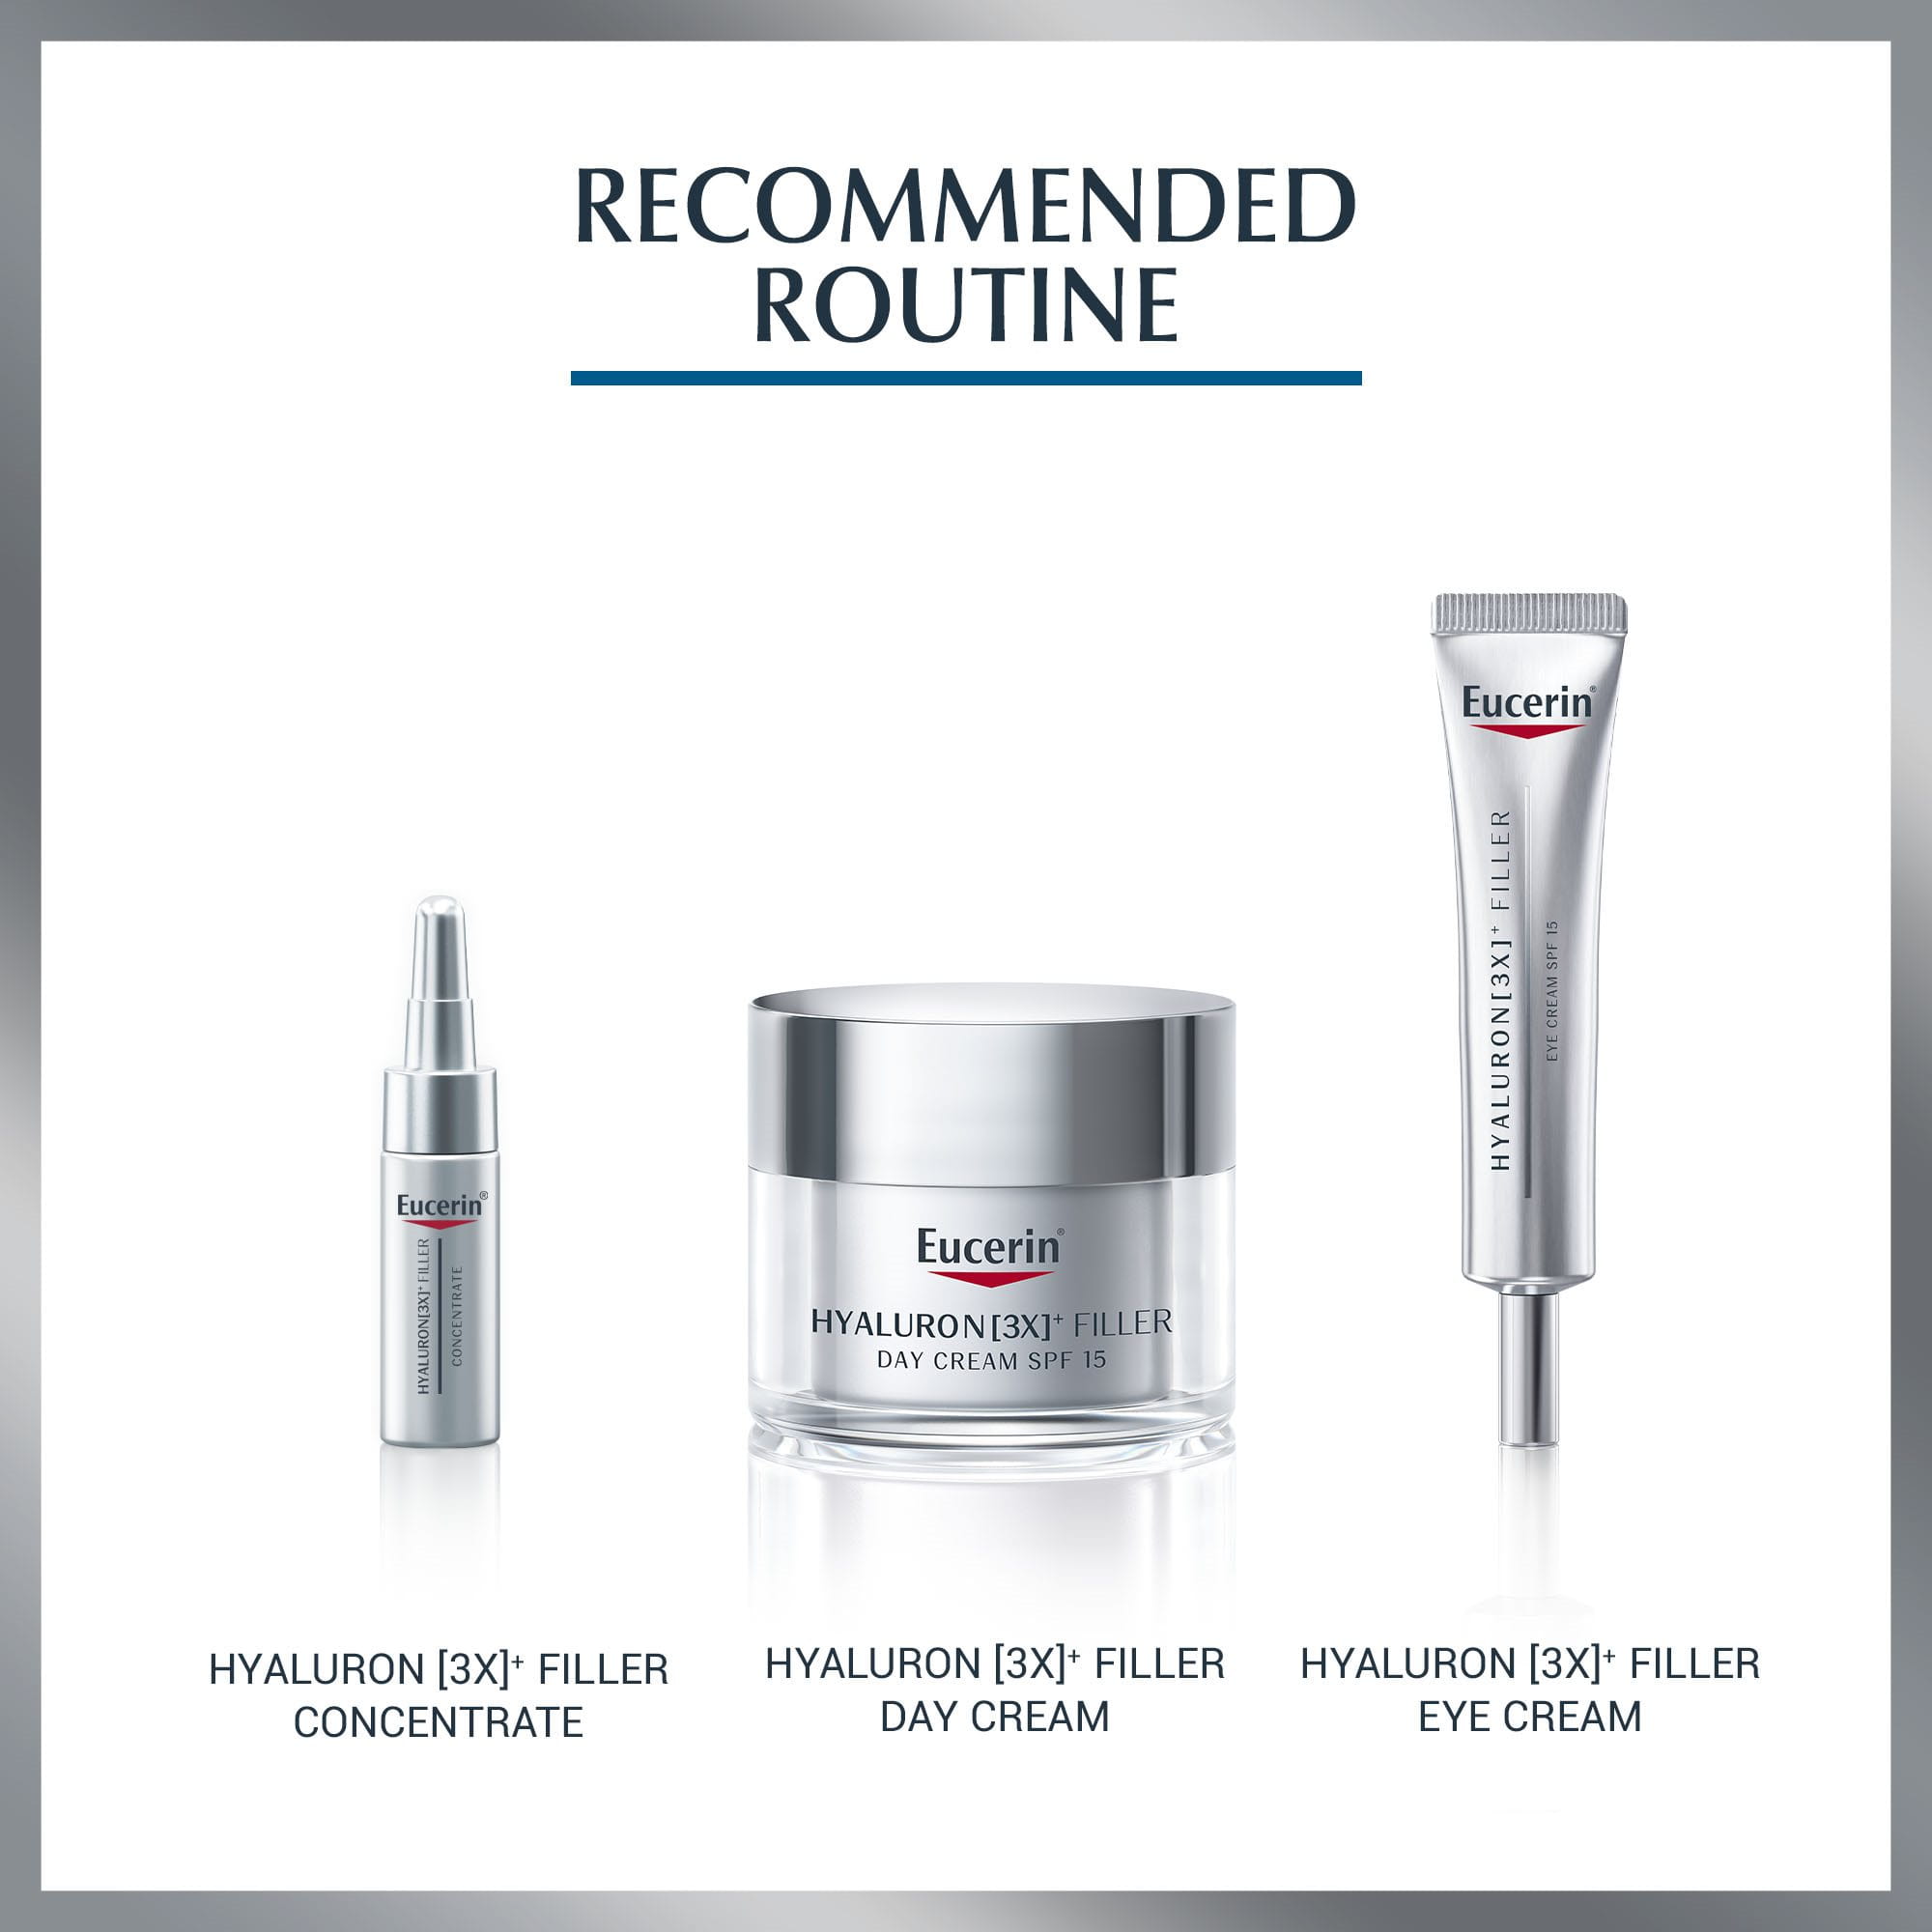 hyaluron filler night cream recommended routine